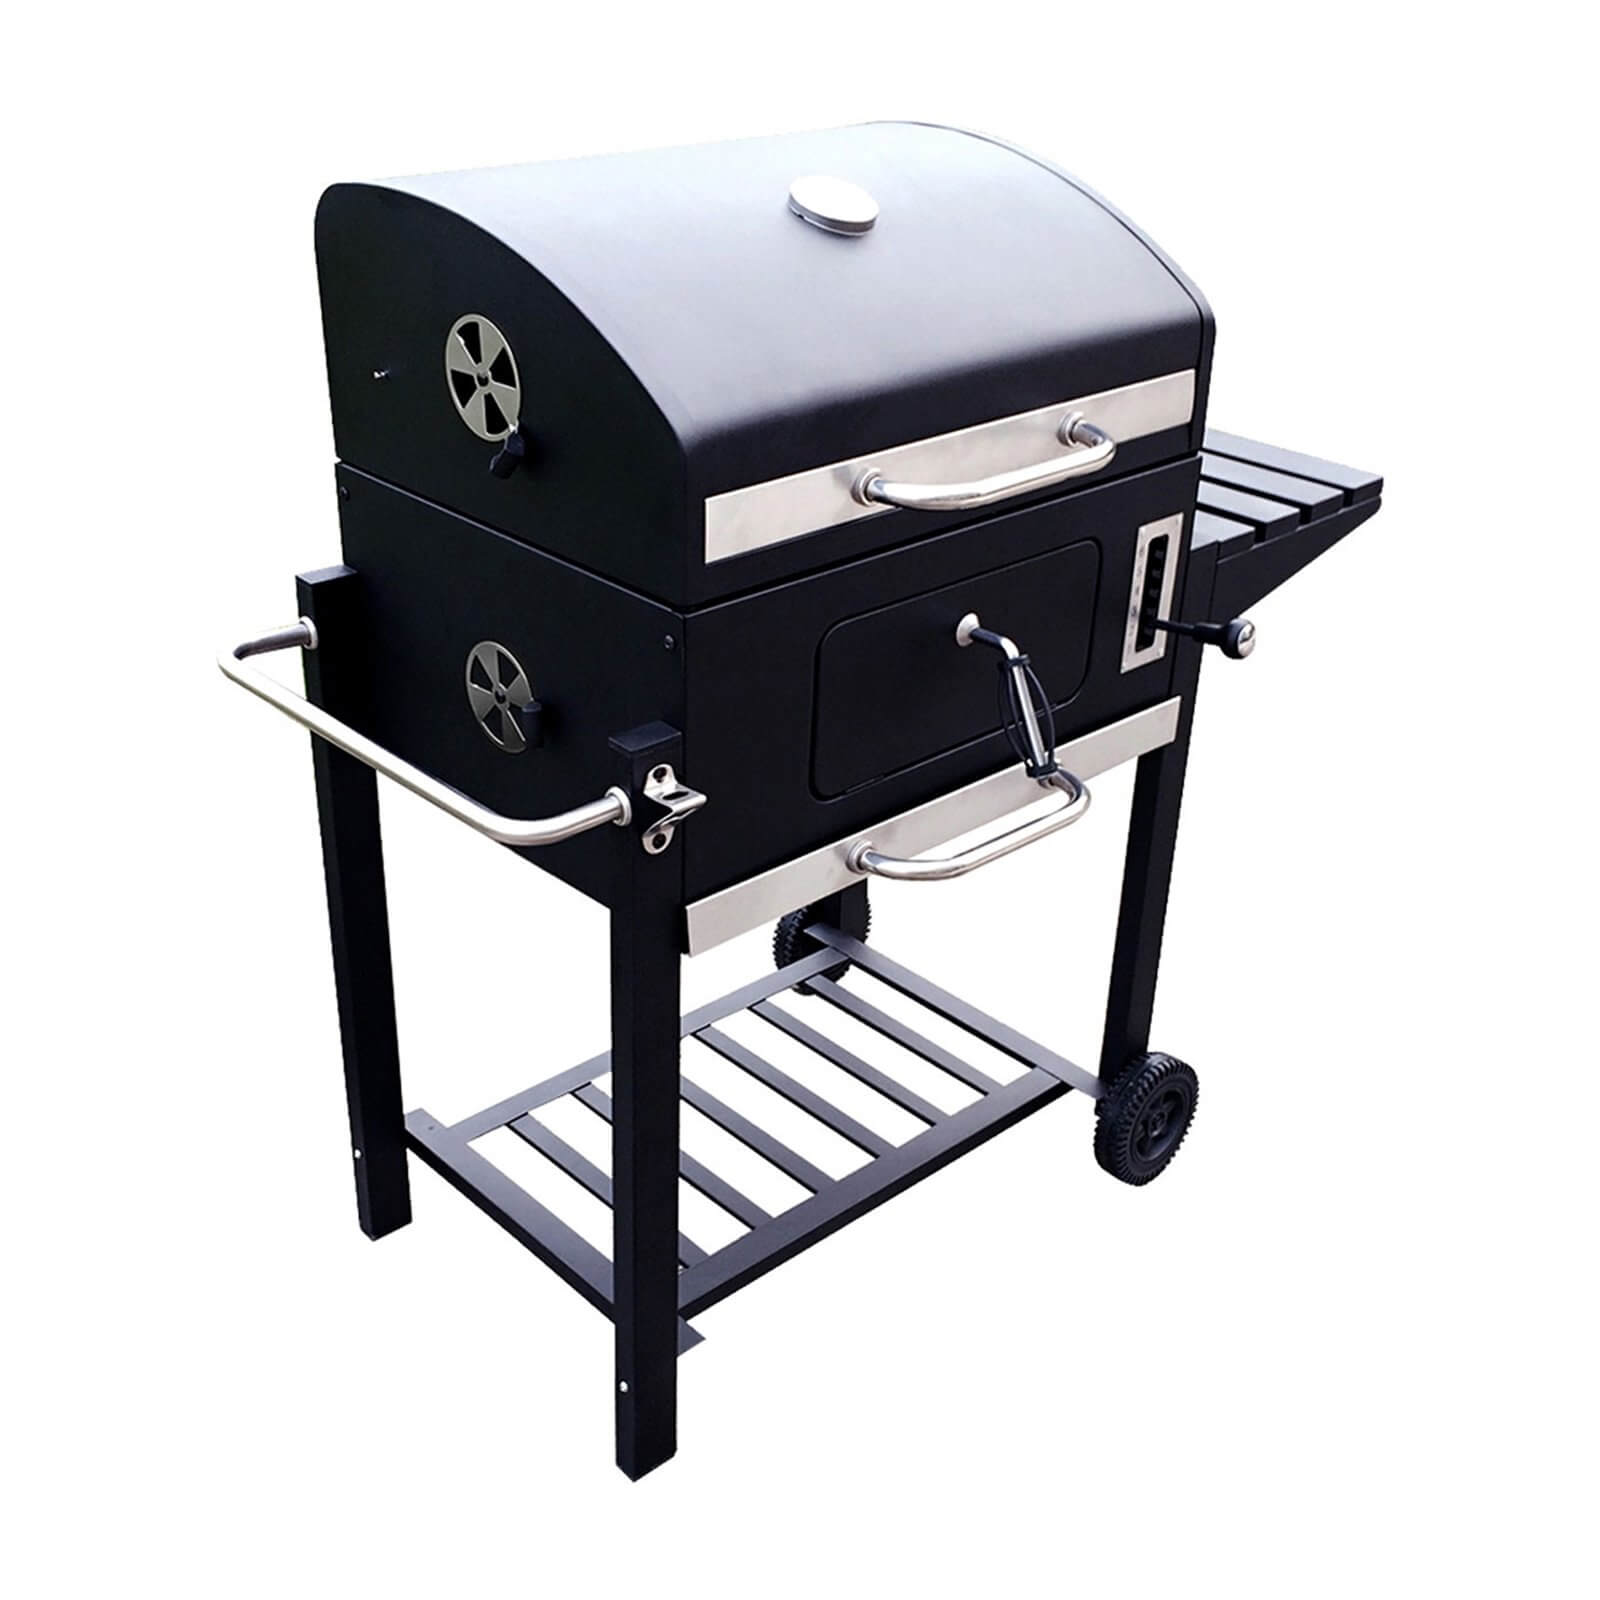 Charles Bentley American Large Portable Charcoal BBQ with 60 x 45cm Cooking Area